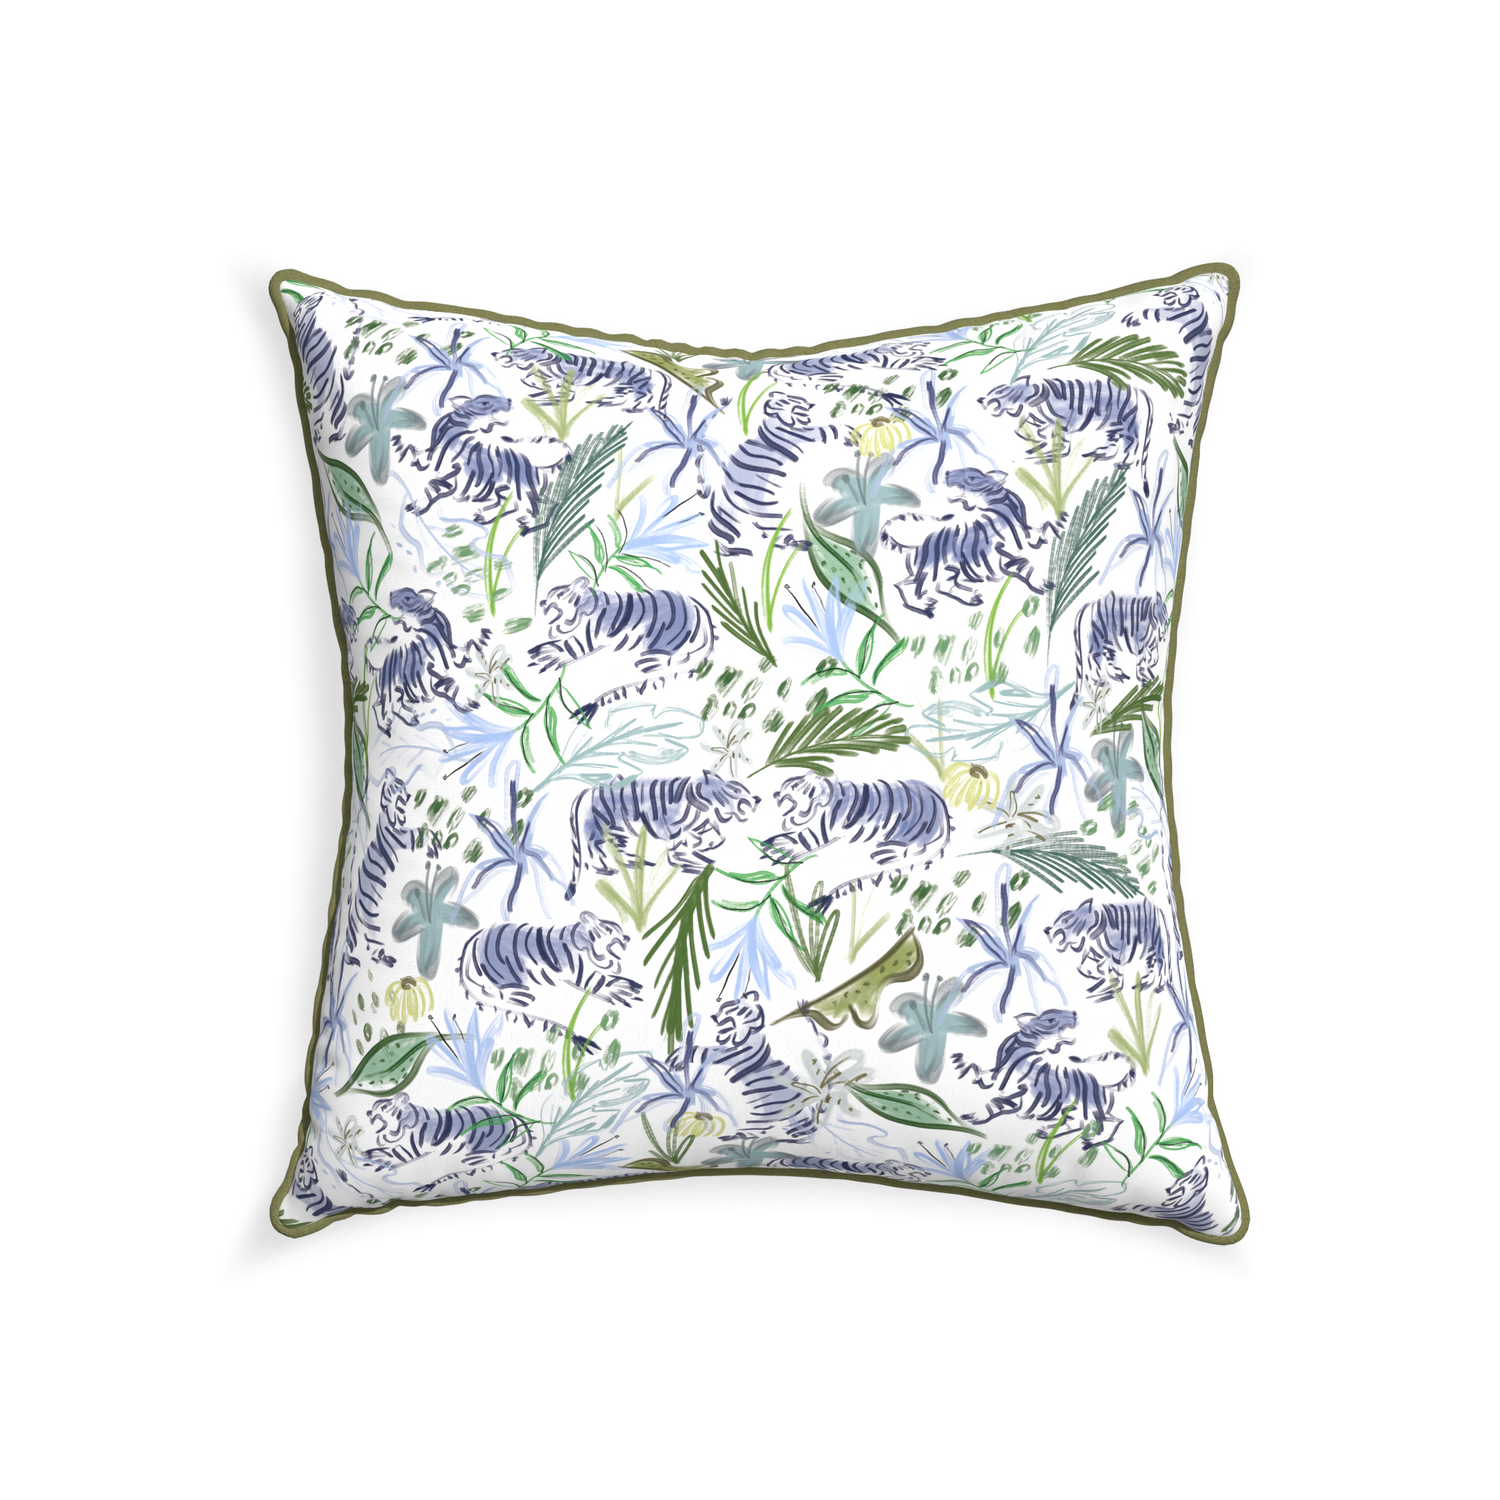 22-square frida green custom pillow with moss piping on white background